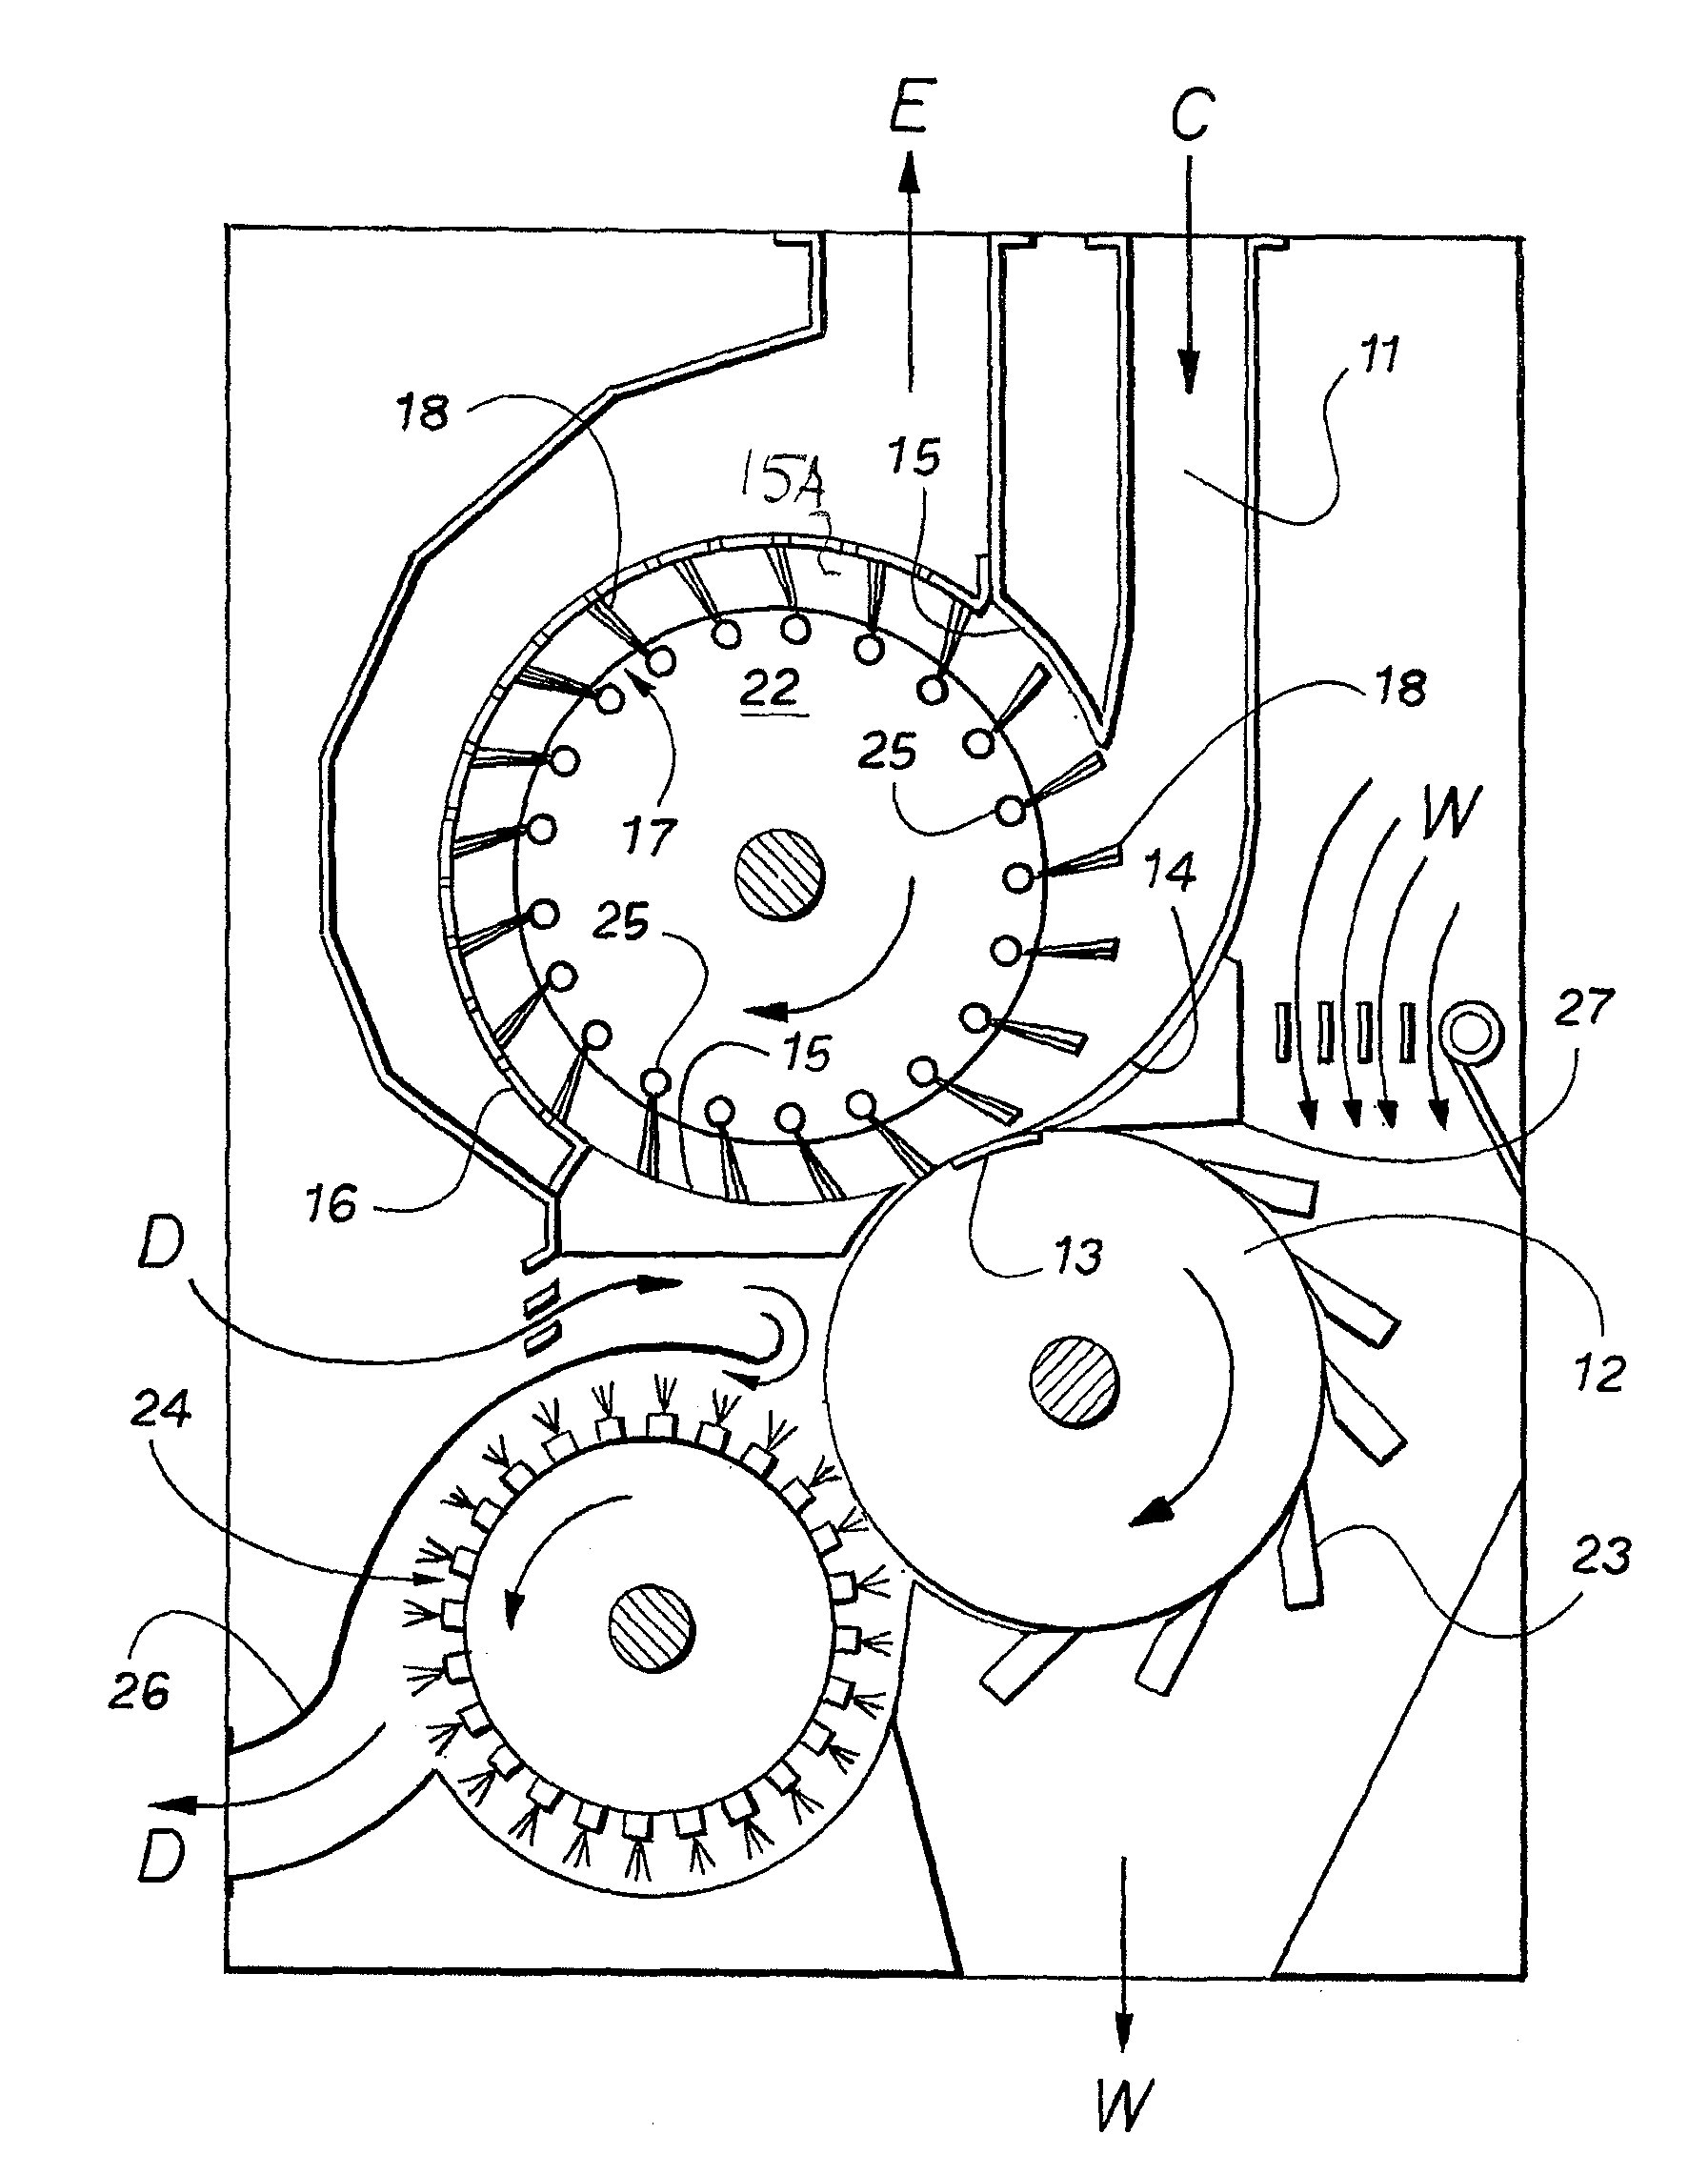 Method and apparatus for separating foreign matter from fibrous material